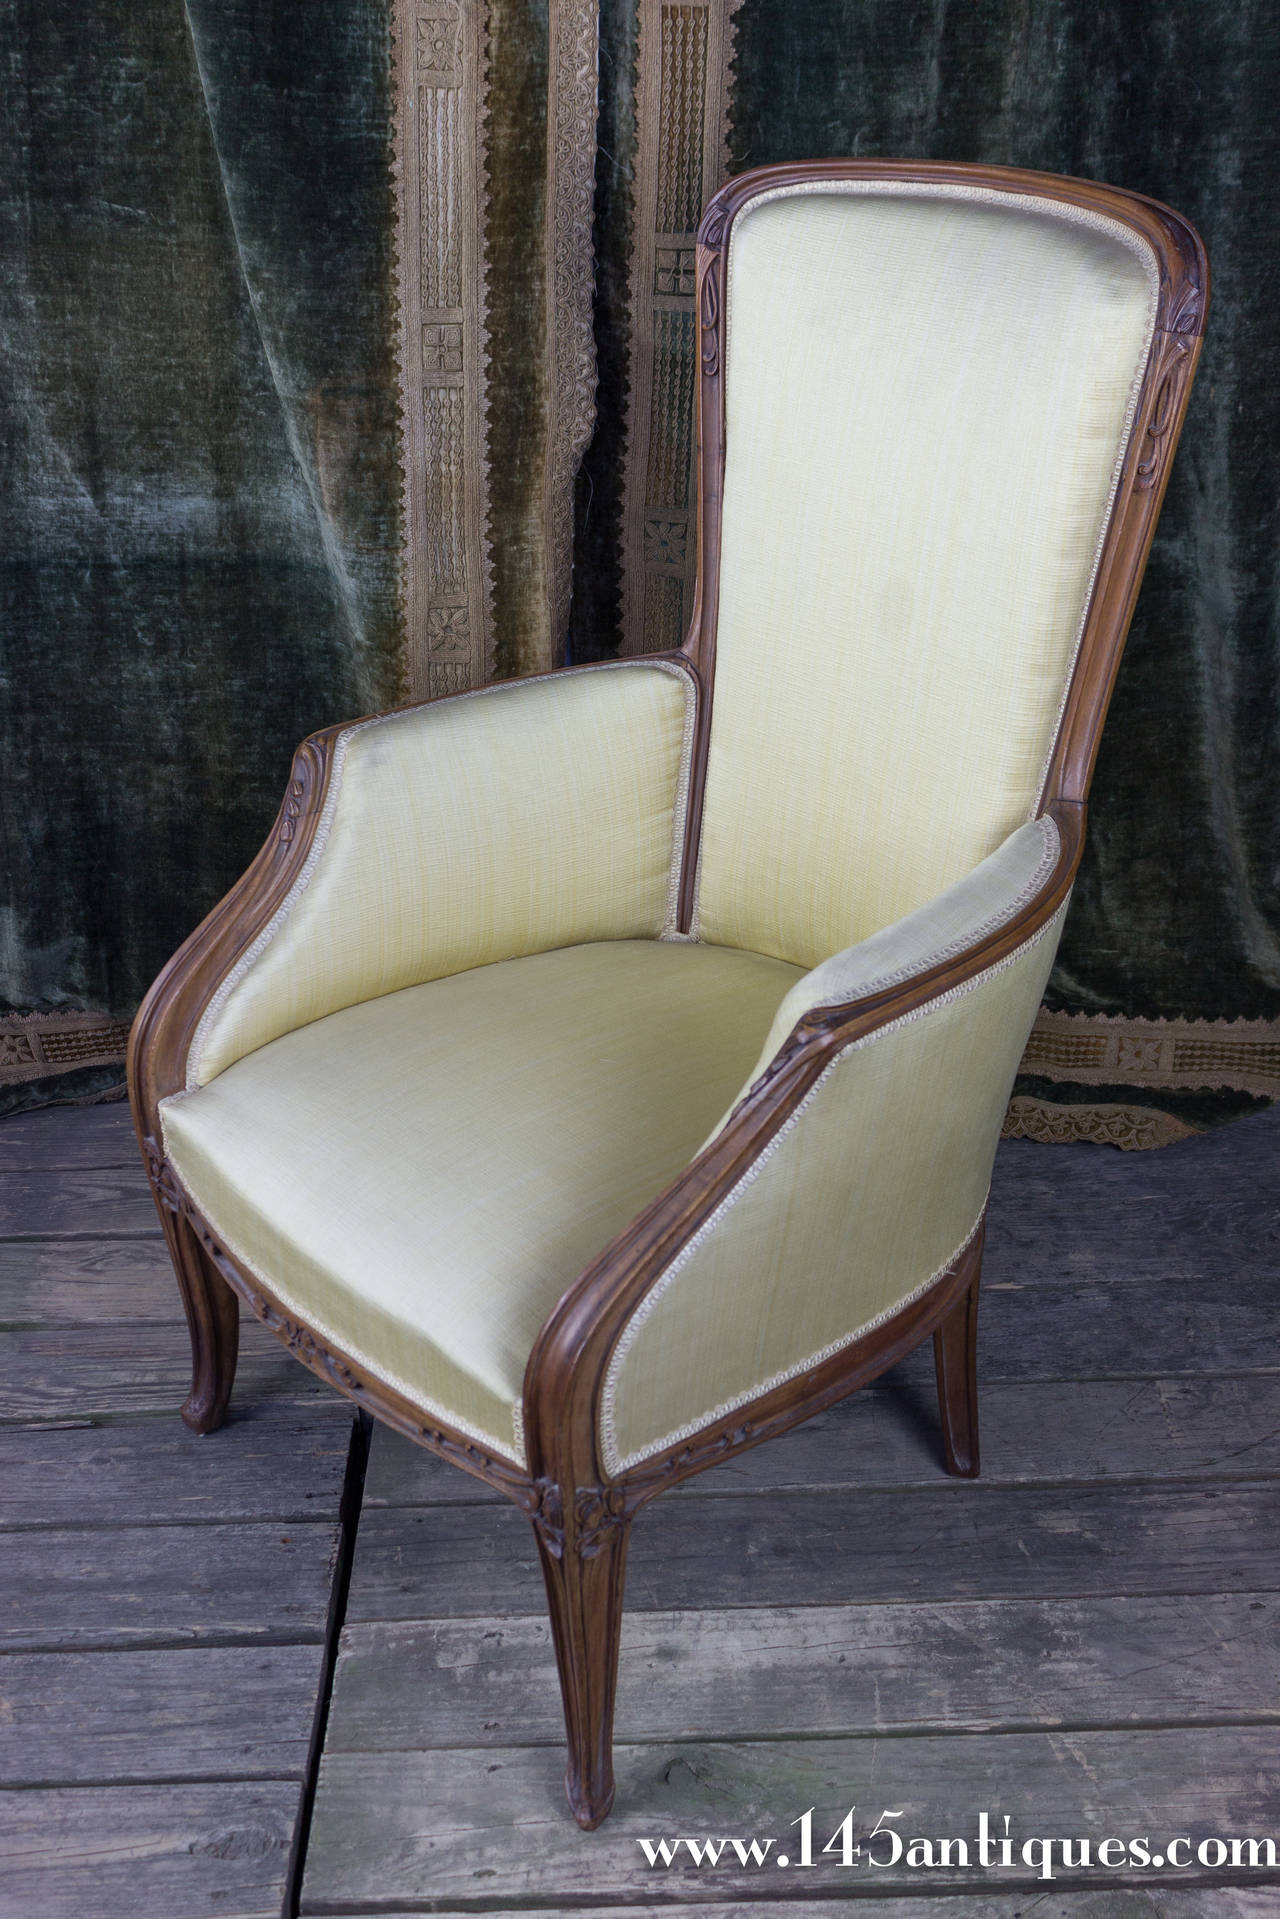 Art Nouveau chair upholstered in cream/yellow tone fabric with hand-carved wood trim. There are two matching side chairs available (ST0215-08B). The armchair is sold separately.